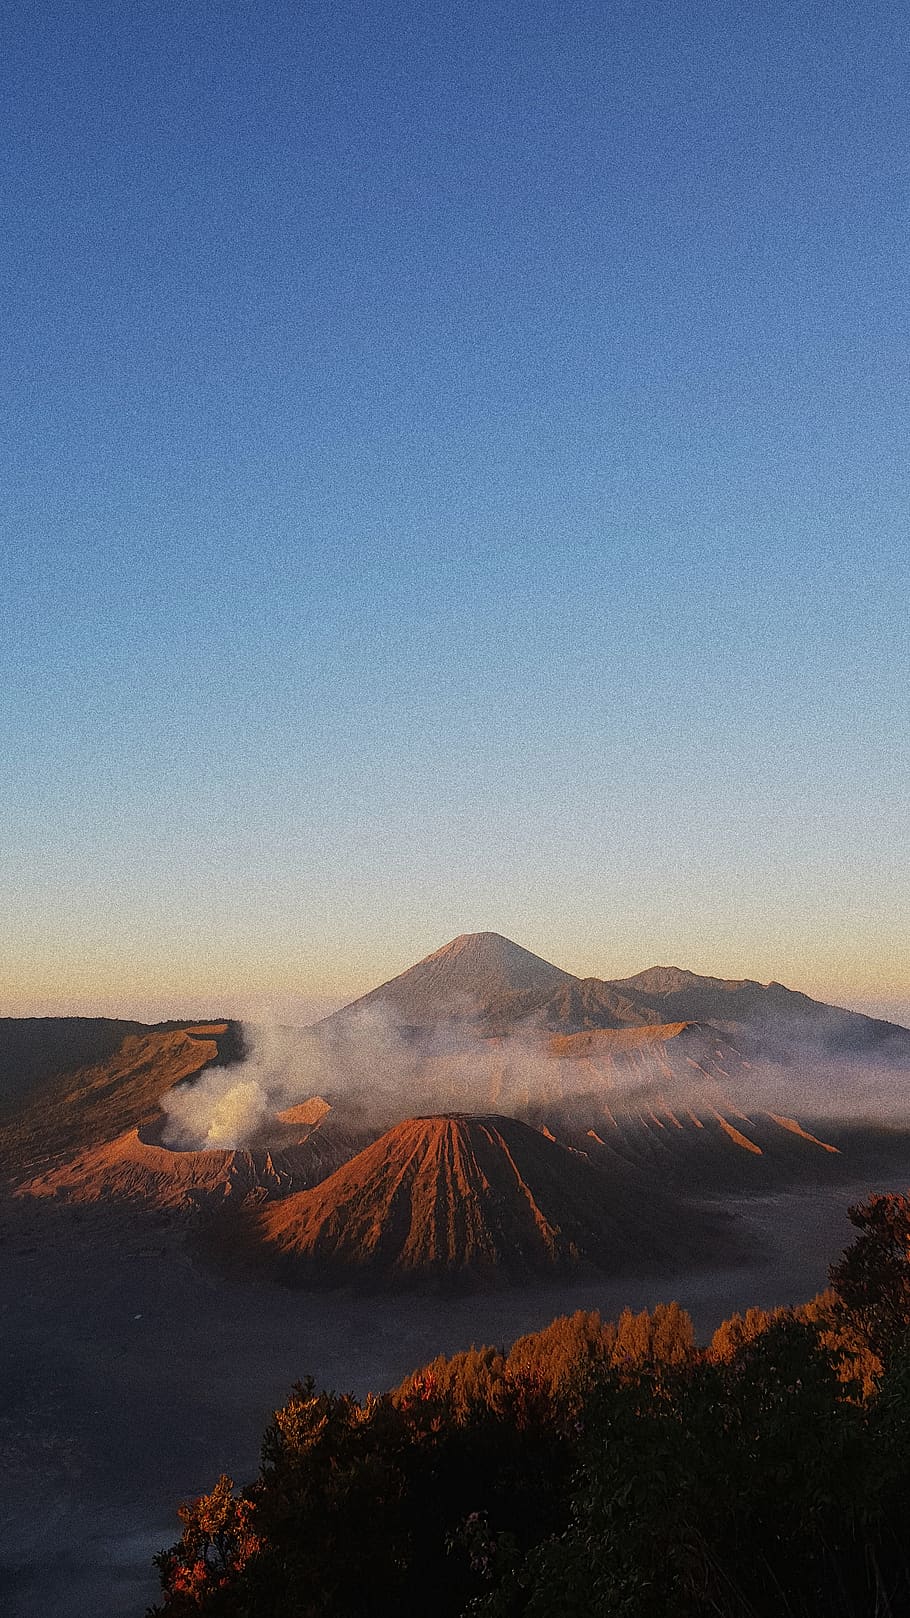 indonesia, mount bromo, sky, scenics - nature, beauty in nature, HD wallpaper